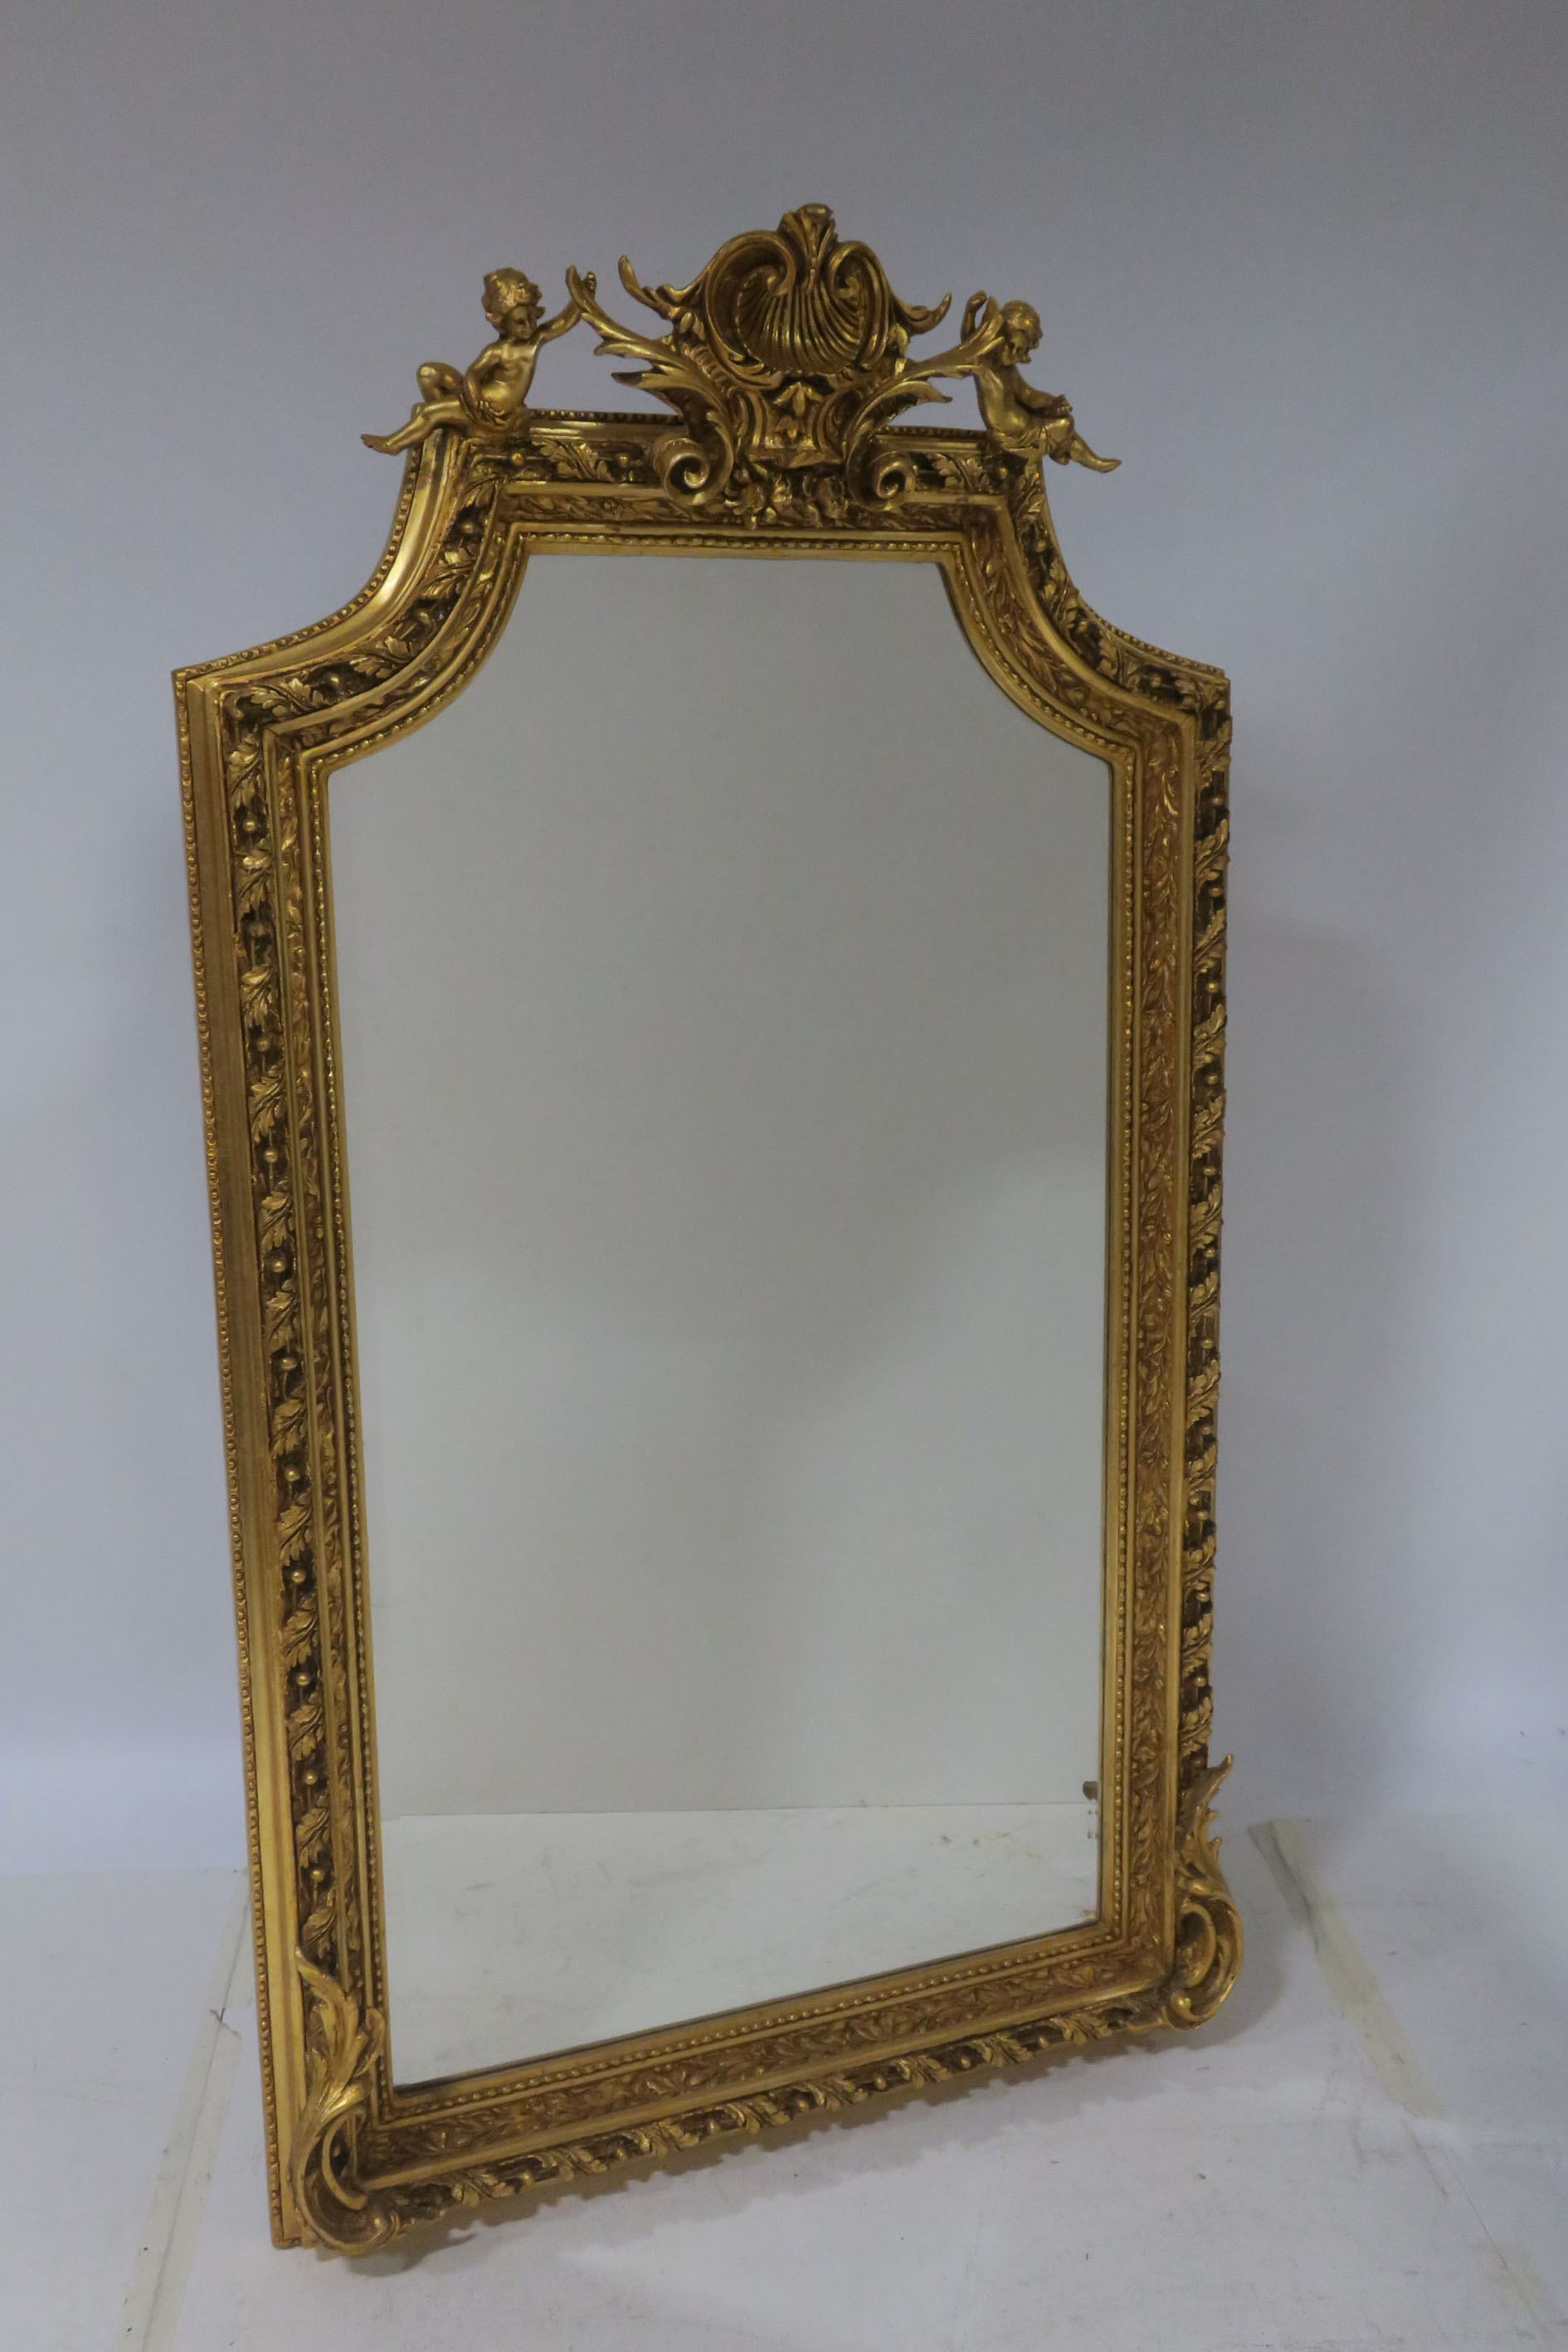 A CONTINENTAL GILTWOOD AND GESSO MIRROR the rectangular shaped bevelled glass plate within a